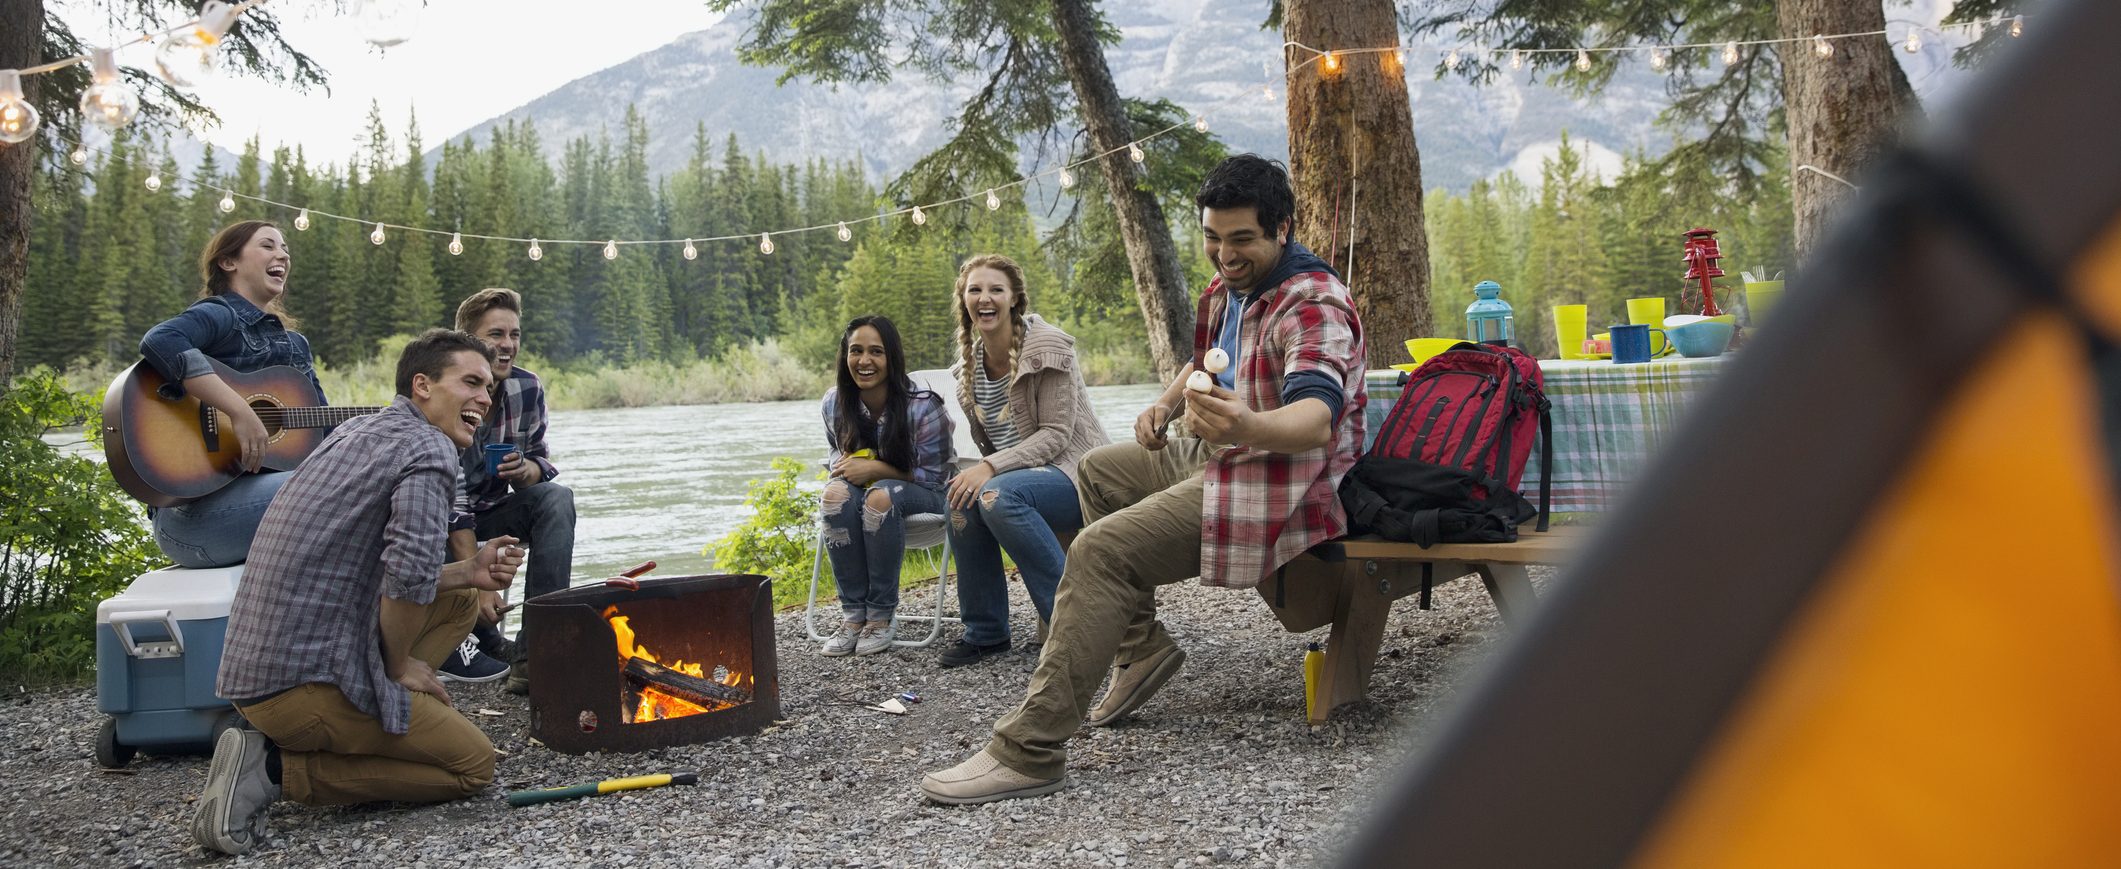 A quick camping getaway is a great way to save money on weekend trips